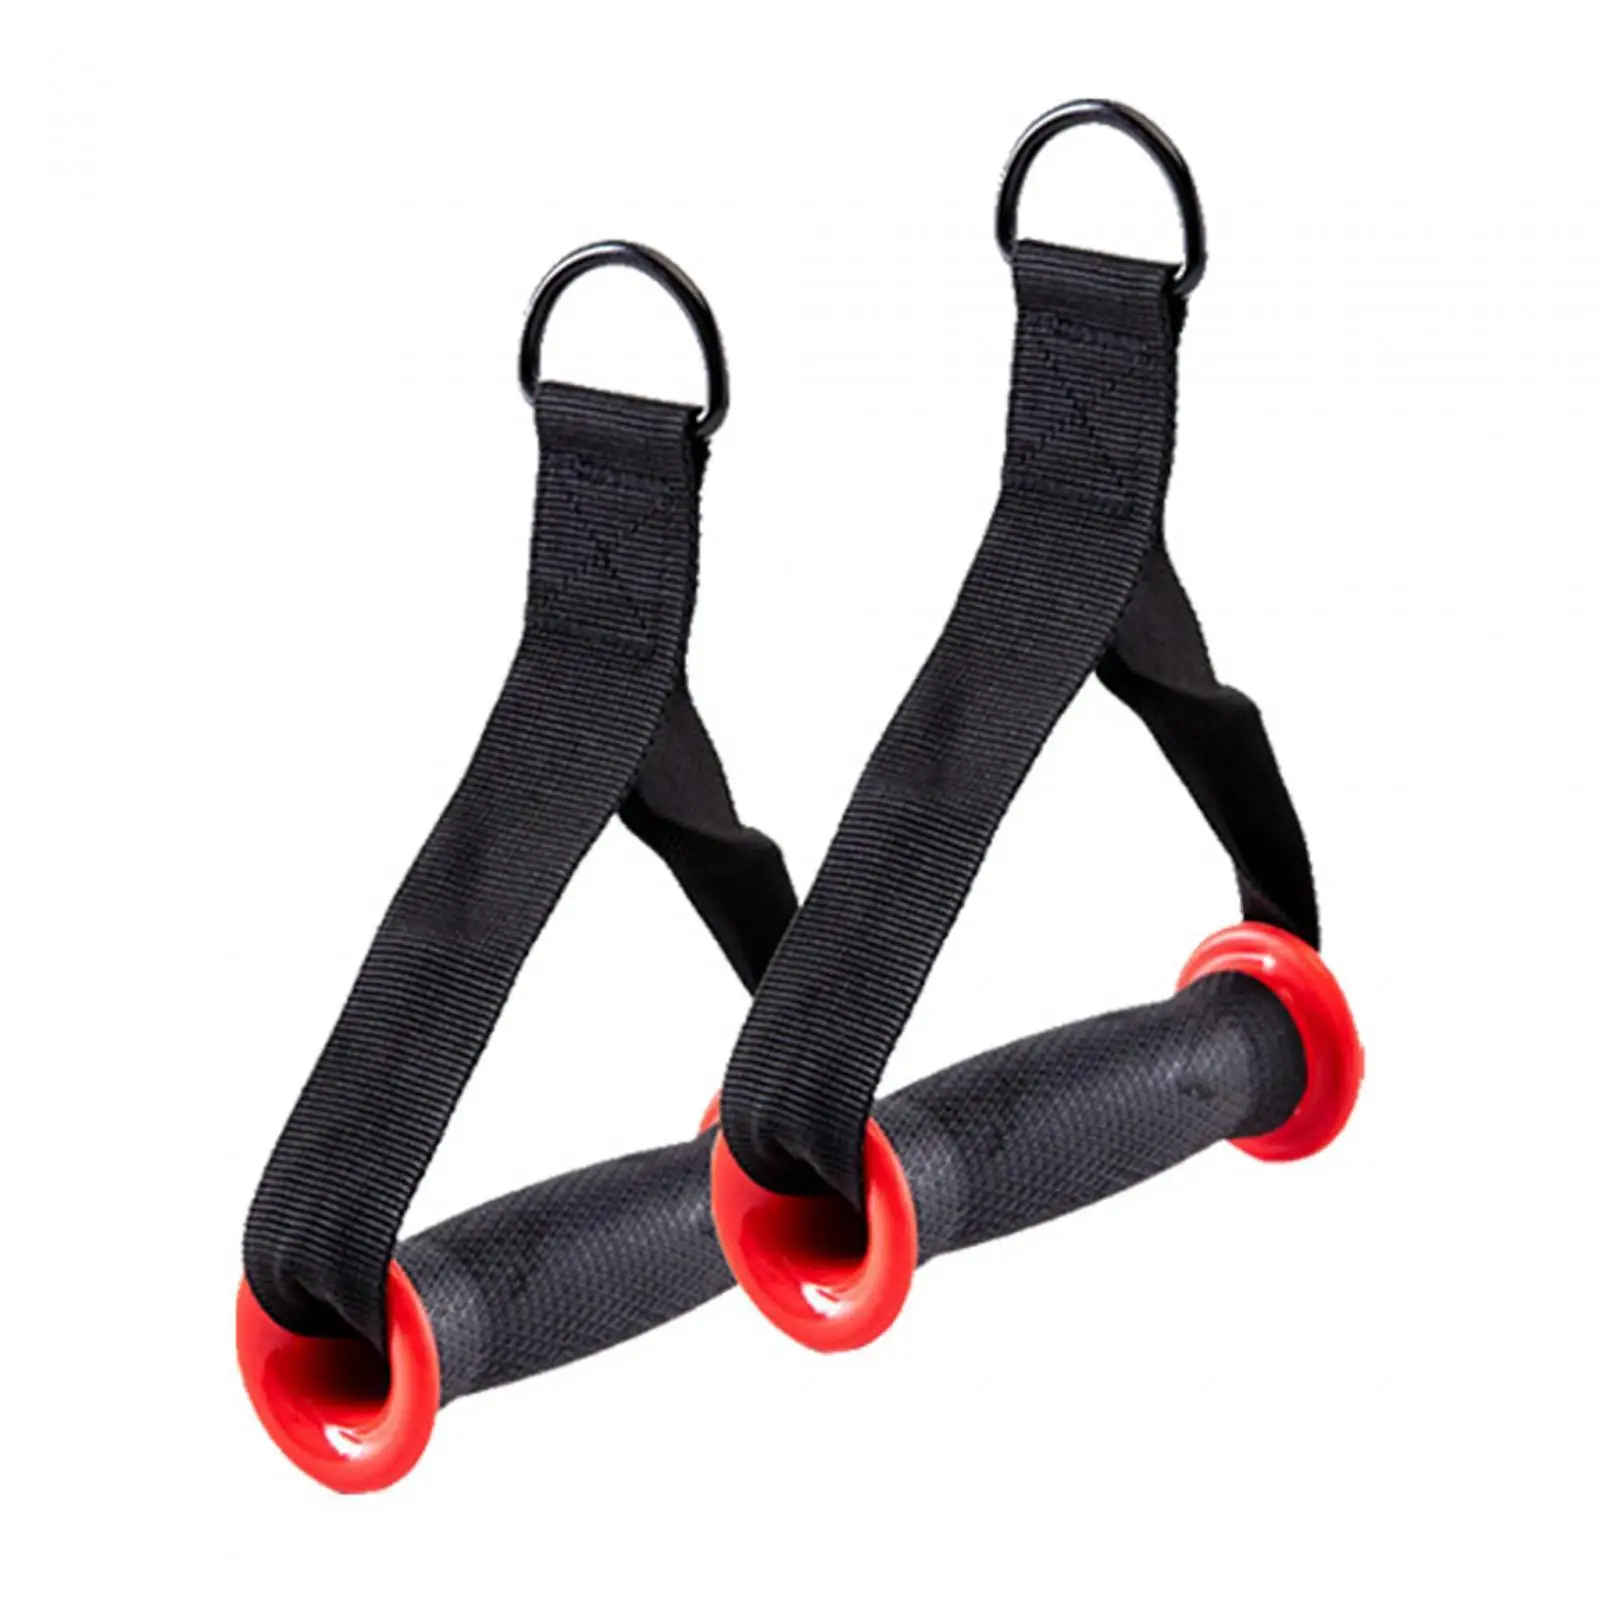 2x Gym Handle Yoga Exercise Workout Grips Resistance Exercise Gym Accessory Home